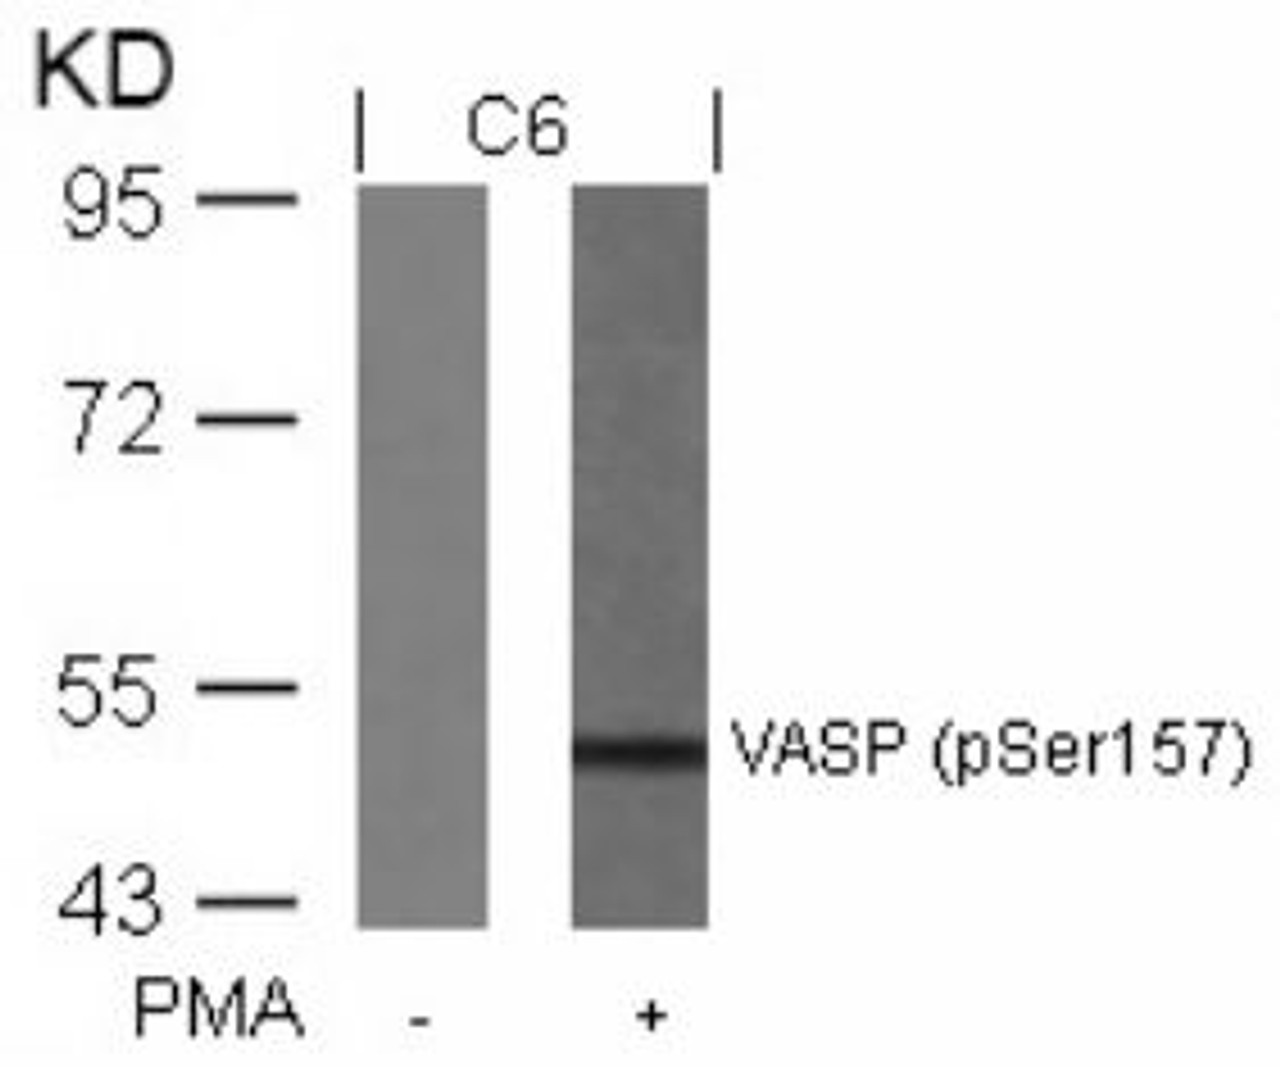 Western blot analysis of lysed extracts from C6 cells untreated or treated with PMA using VASP (Phospho-Ser157) .